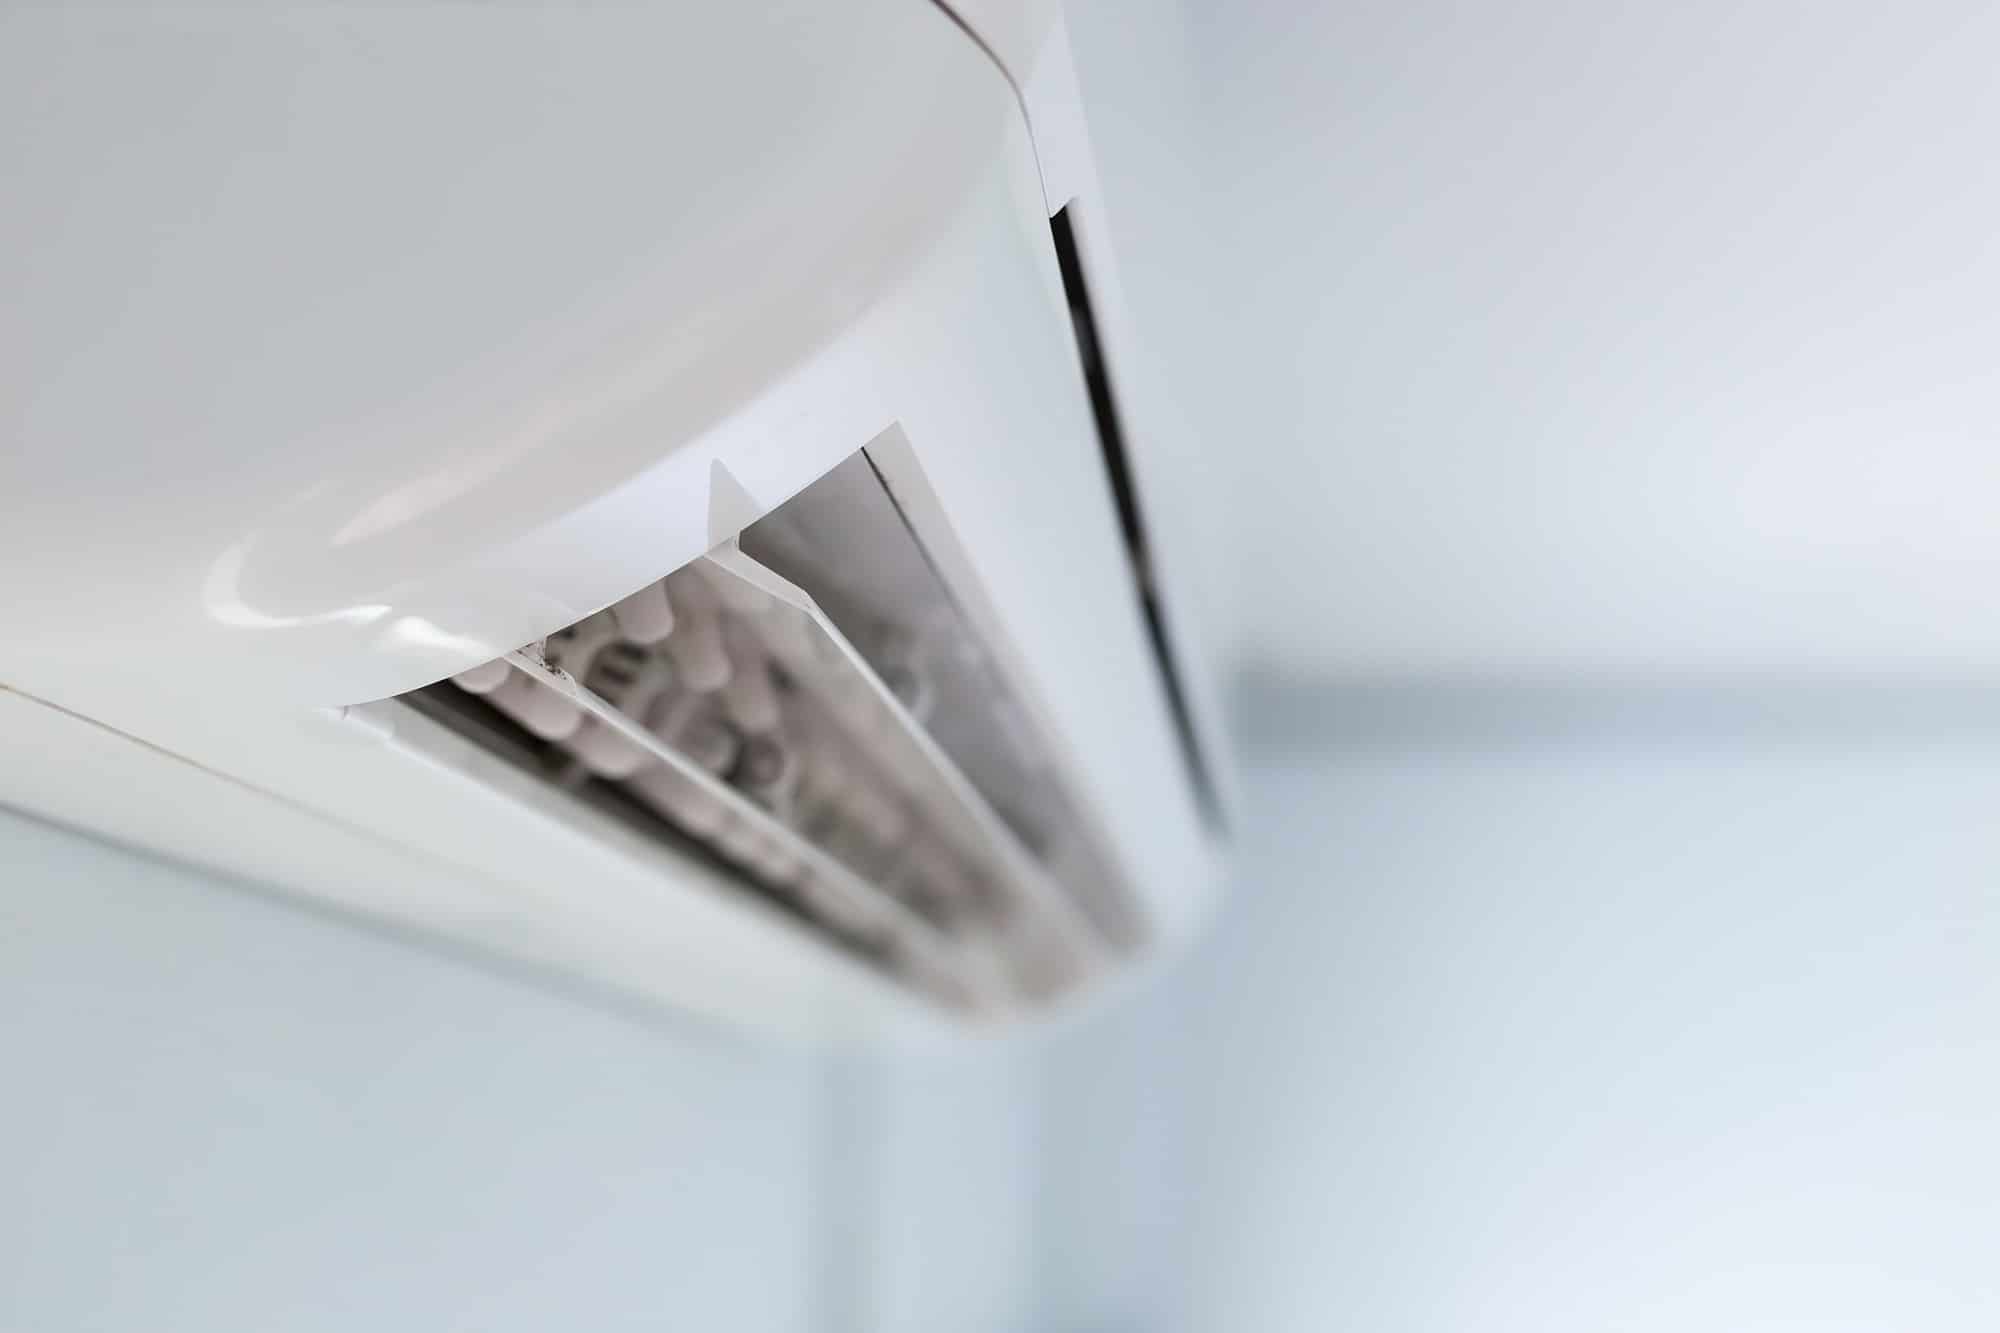 Ductless air conditioning works faster